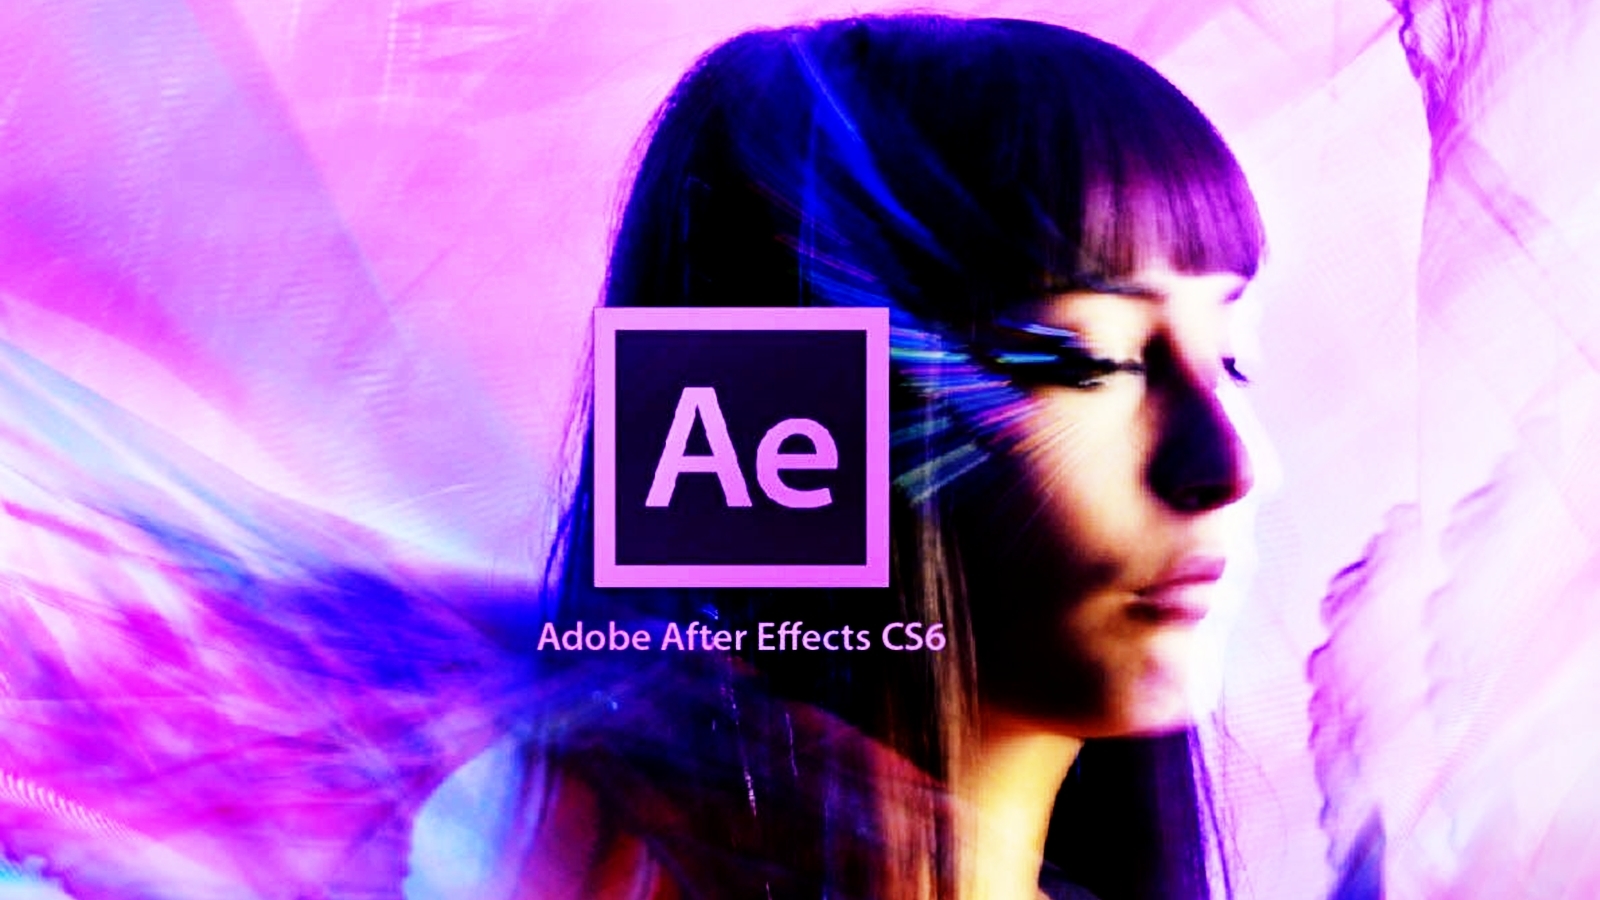 After effects работа. Adobe after Effects. Адобе эффект. Программа Афтер эффект. Adobe after Effects уроки.